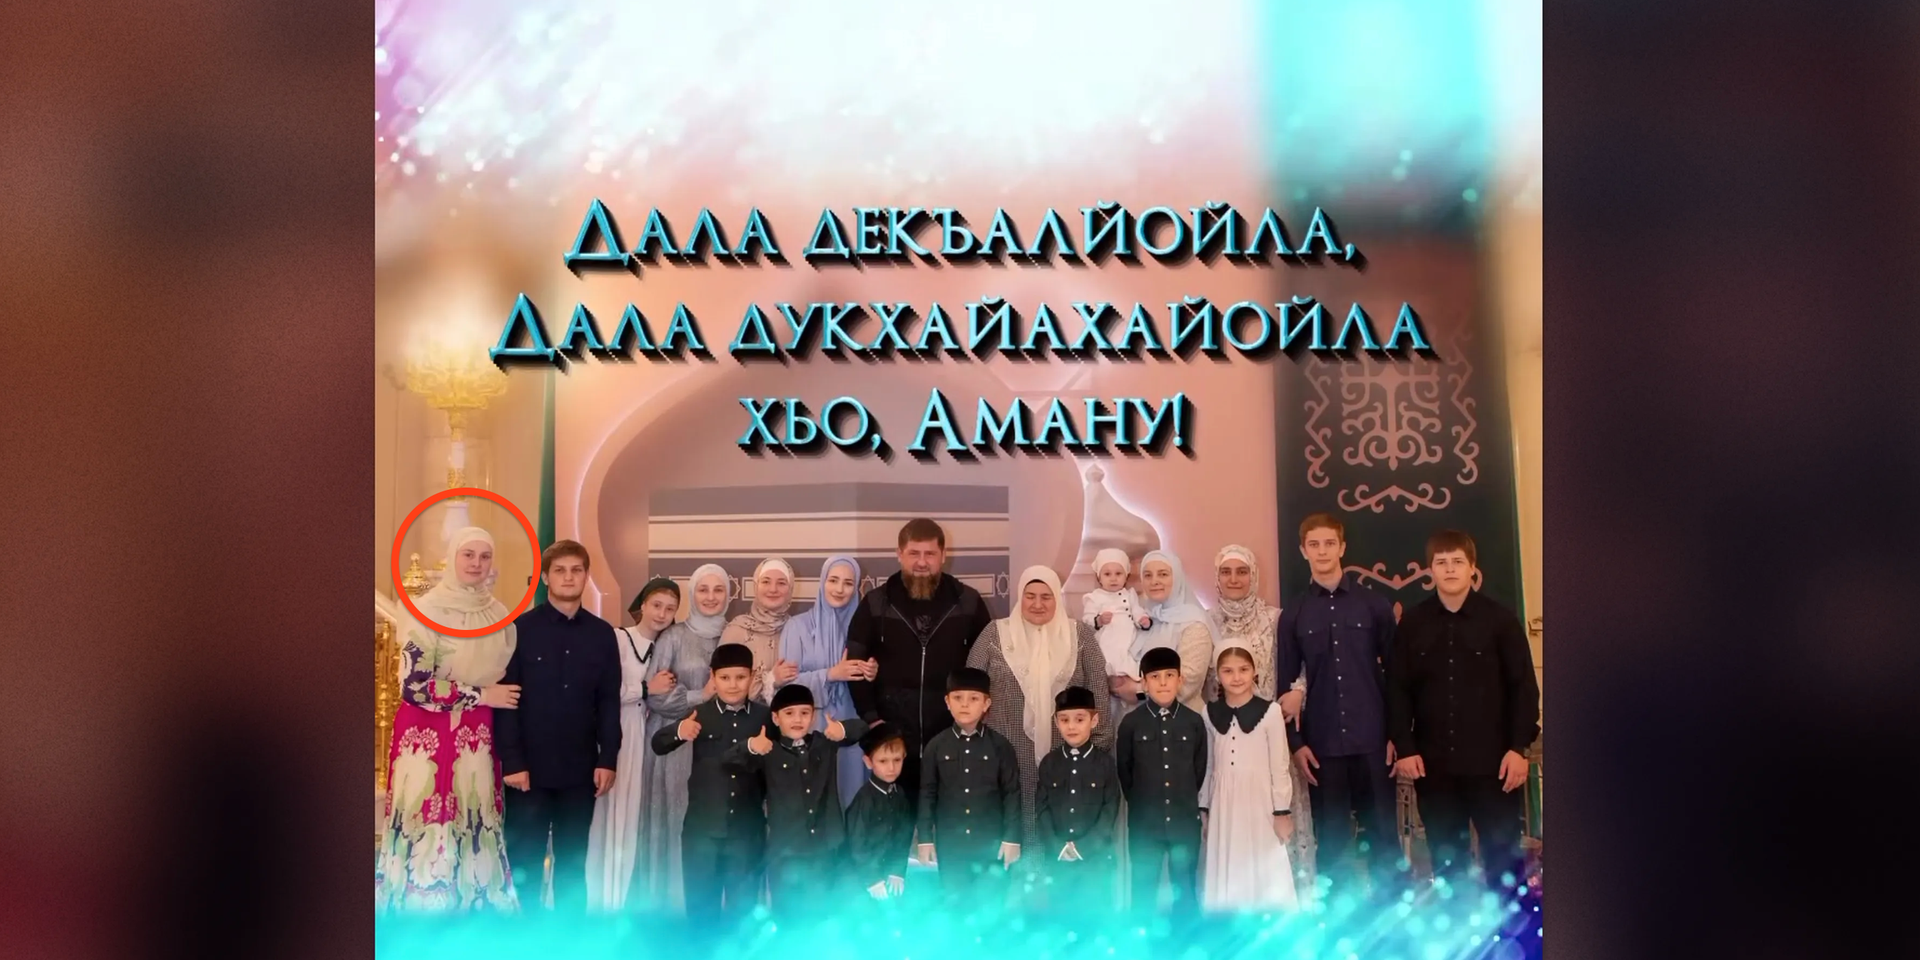 Ramzan Kadyrov Published a Family Photo with His Secret Wife